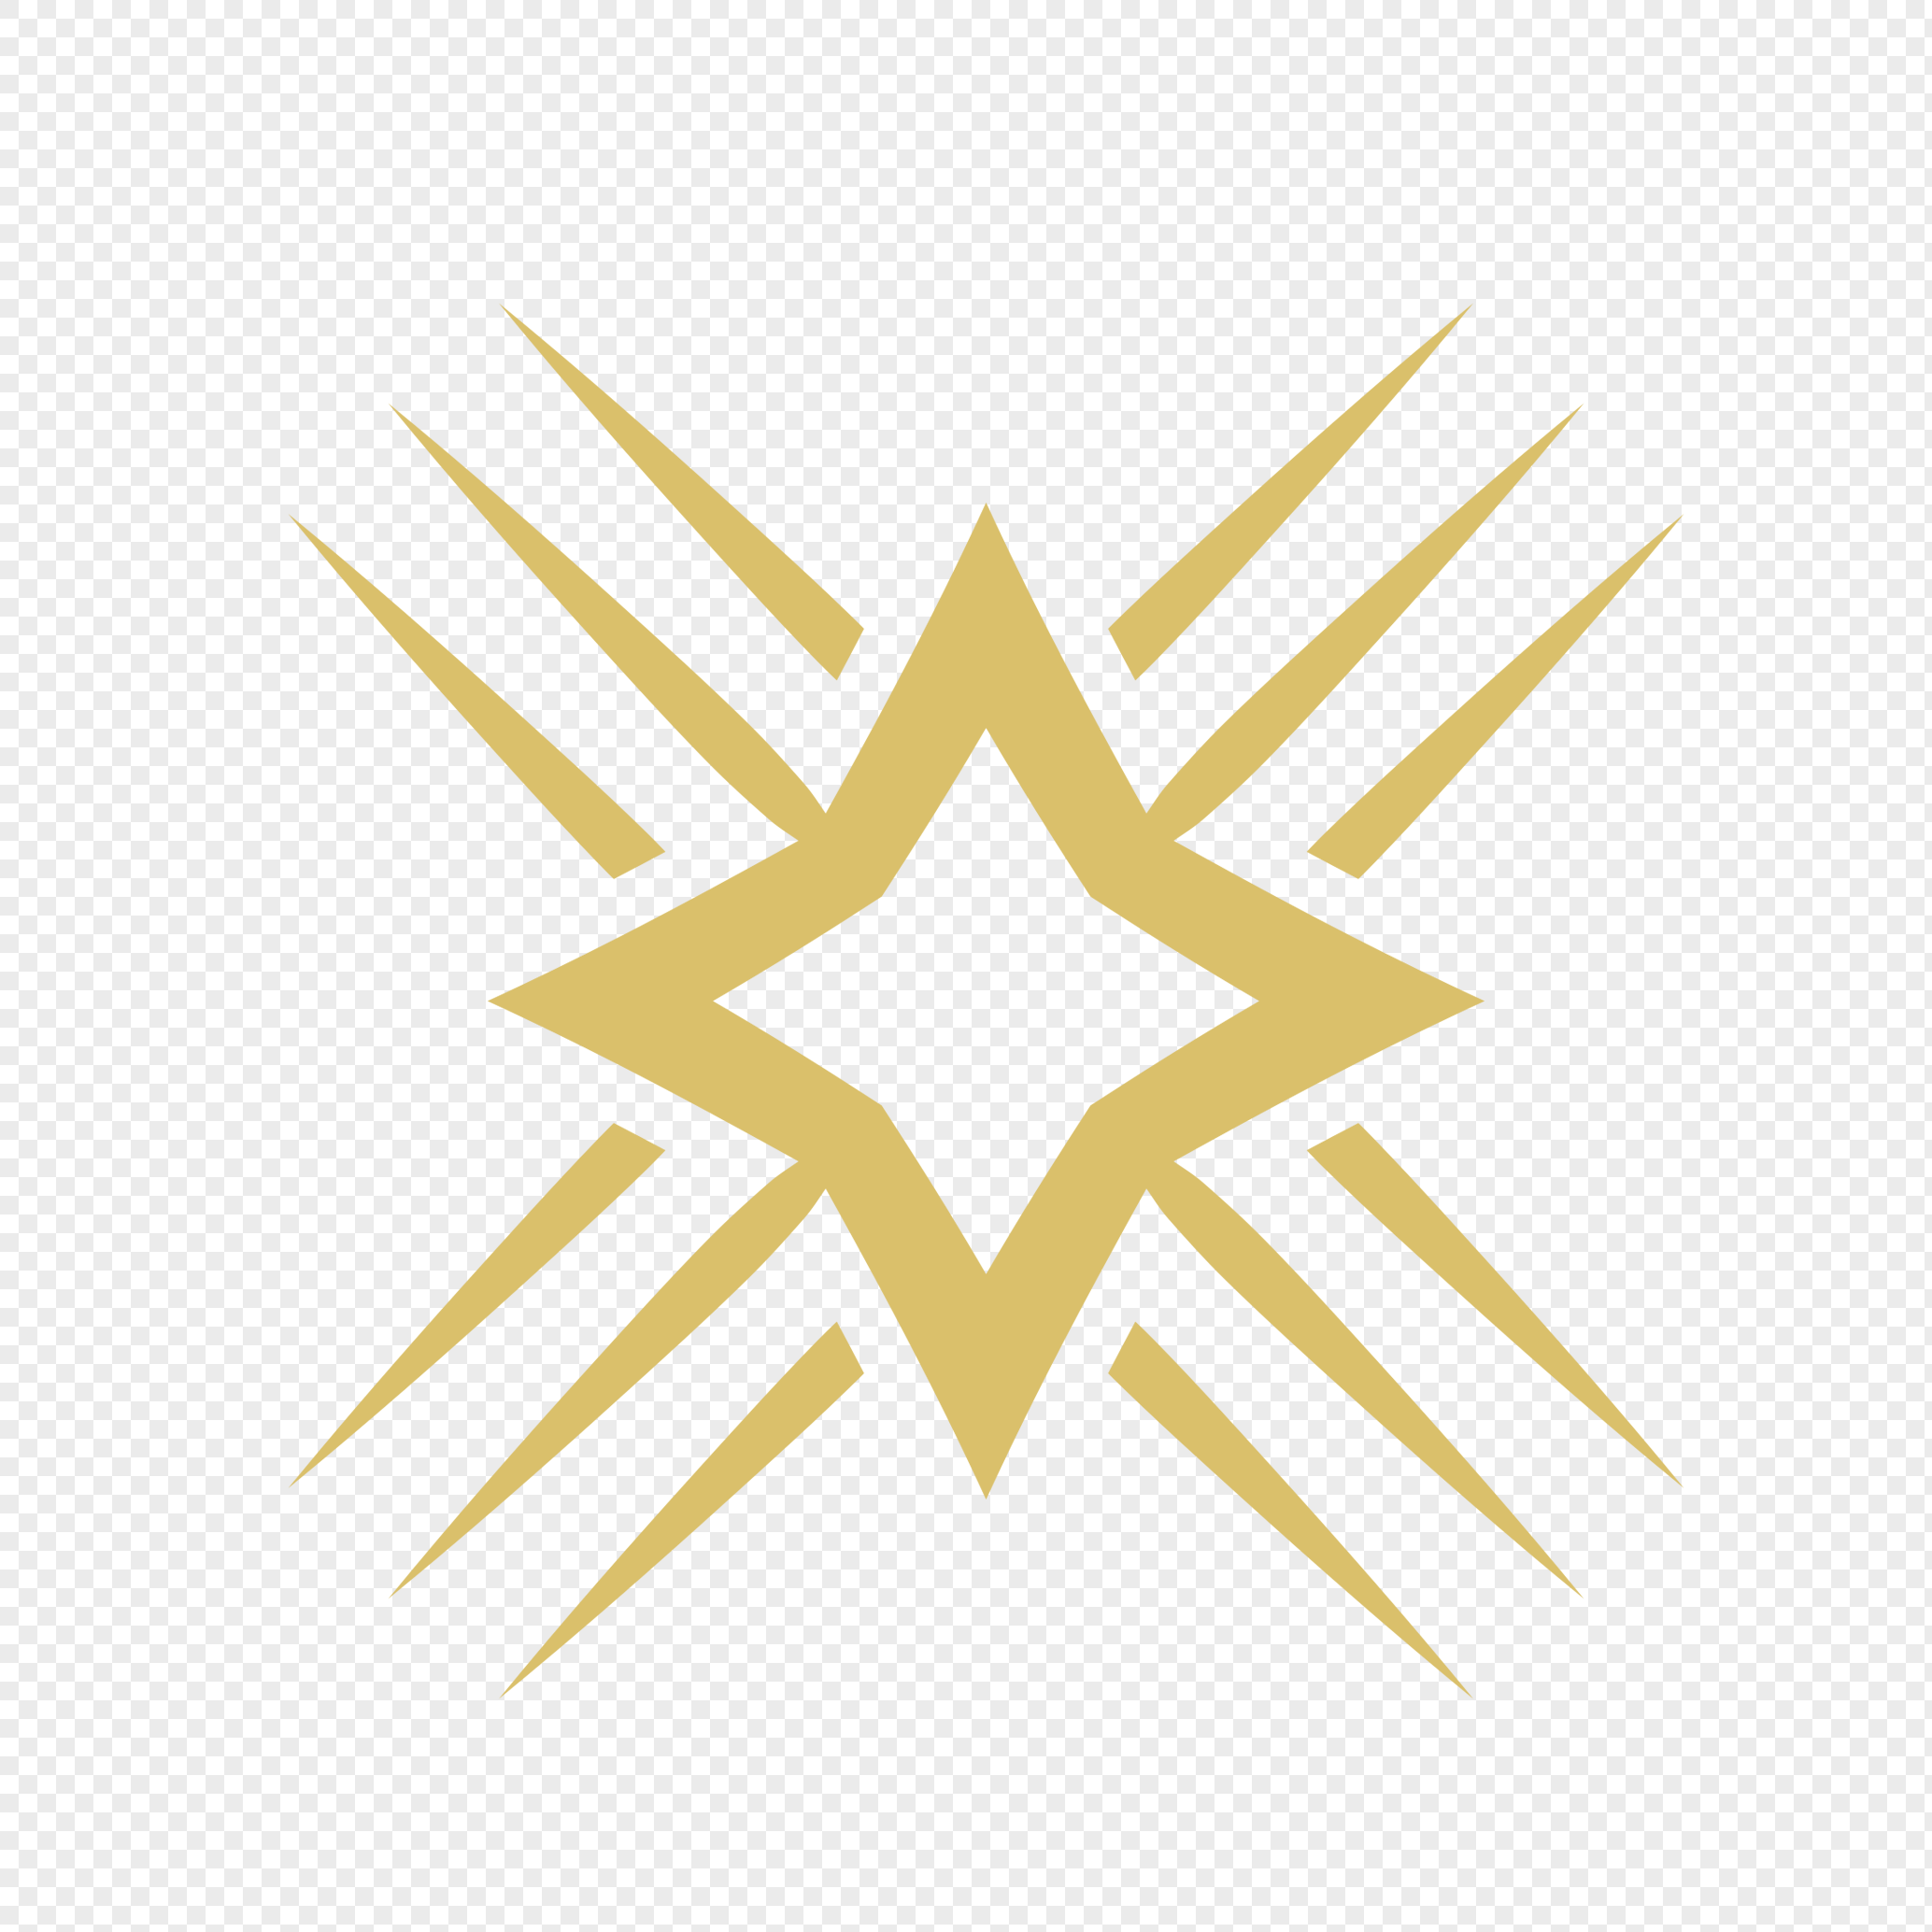 Snow Star Logo - Winter snow star decoration png image_picture free download ...